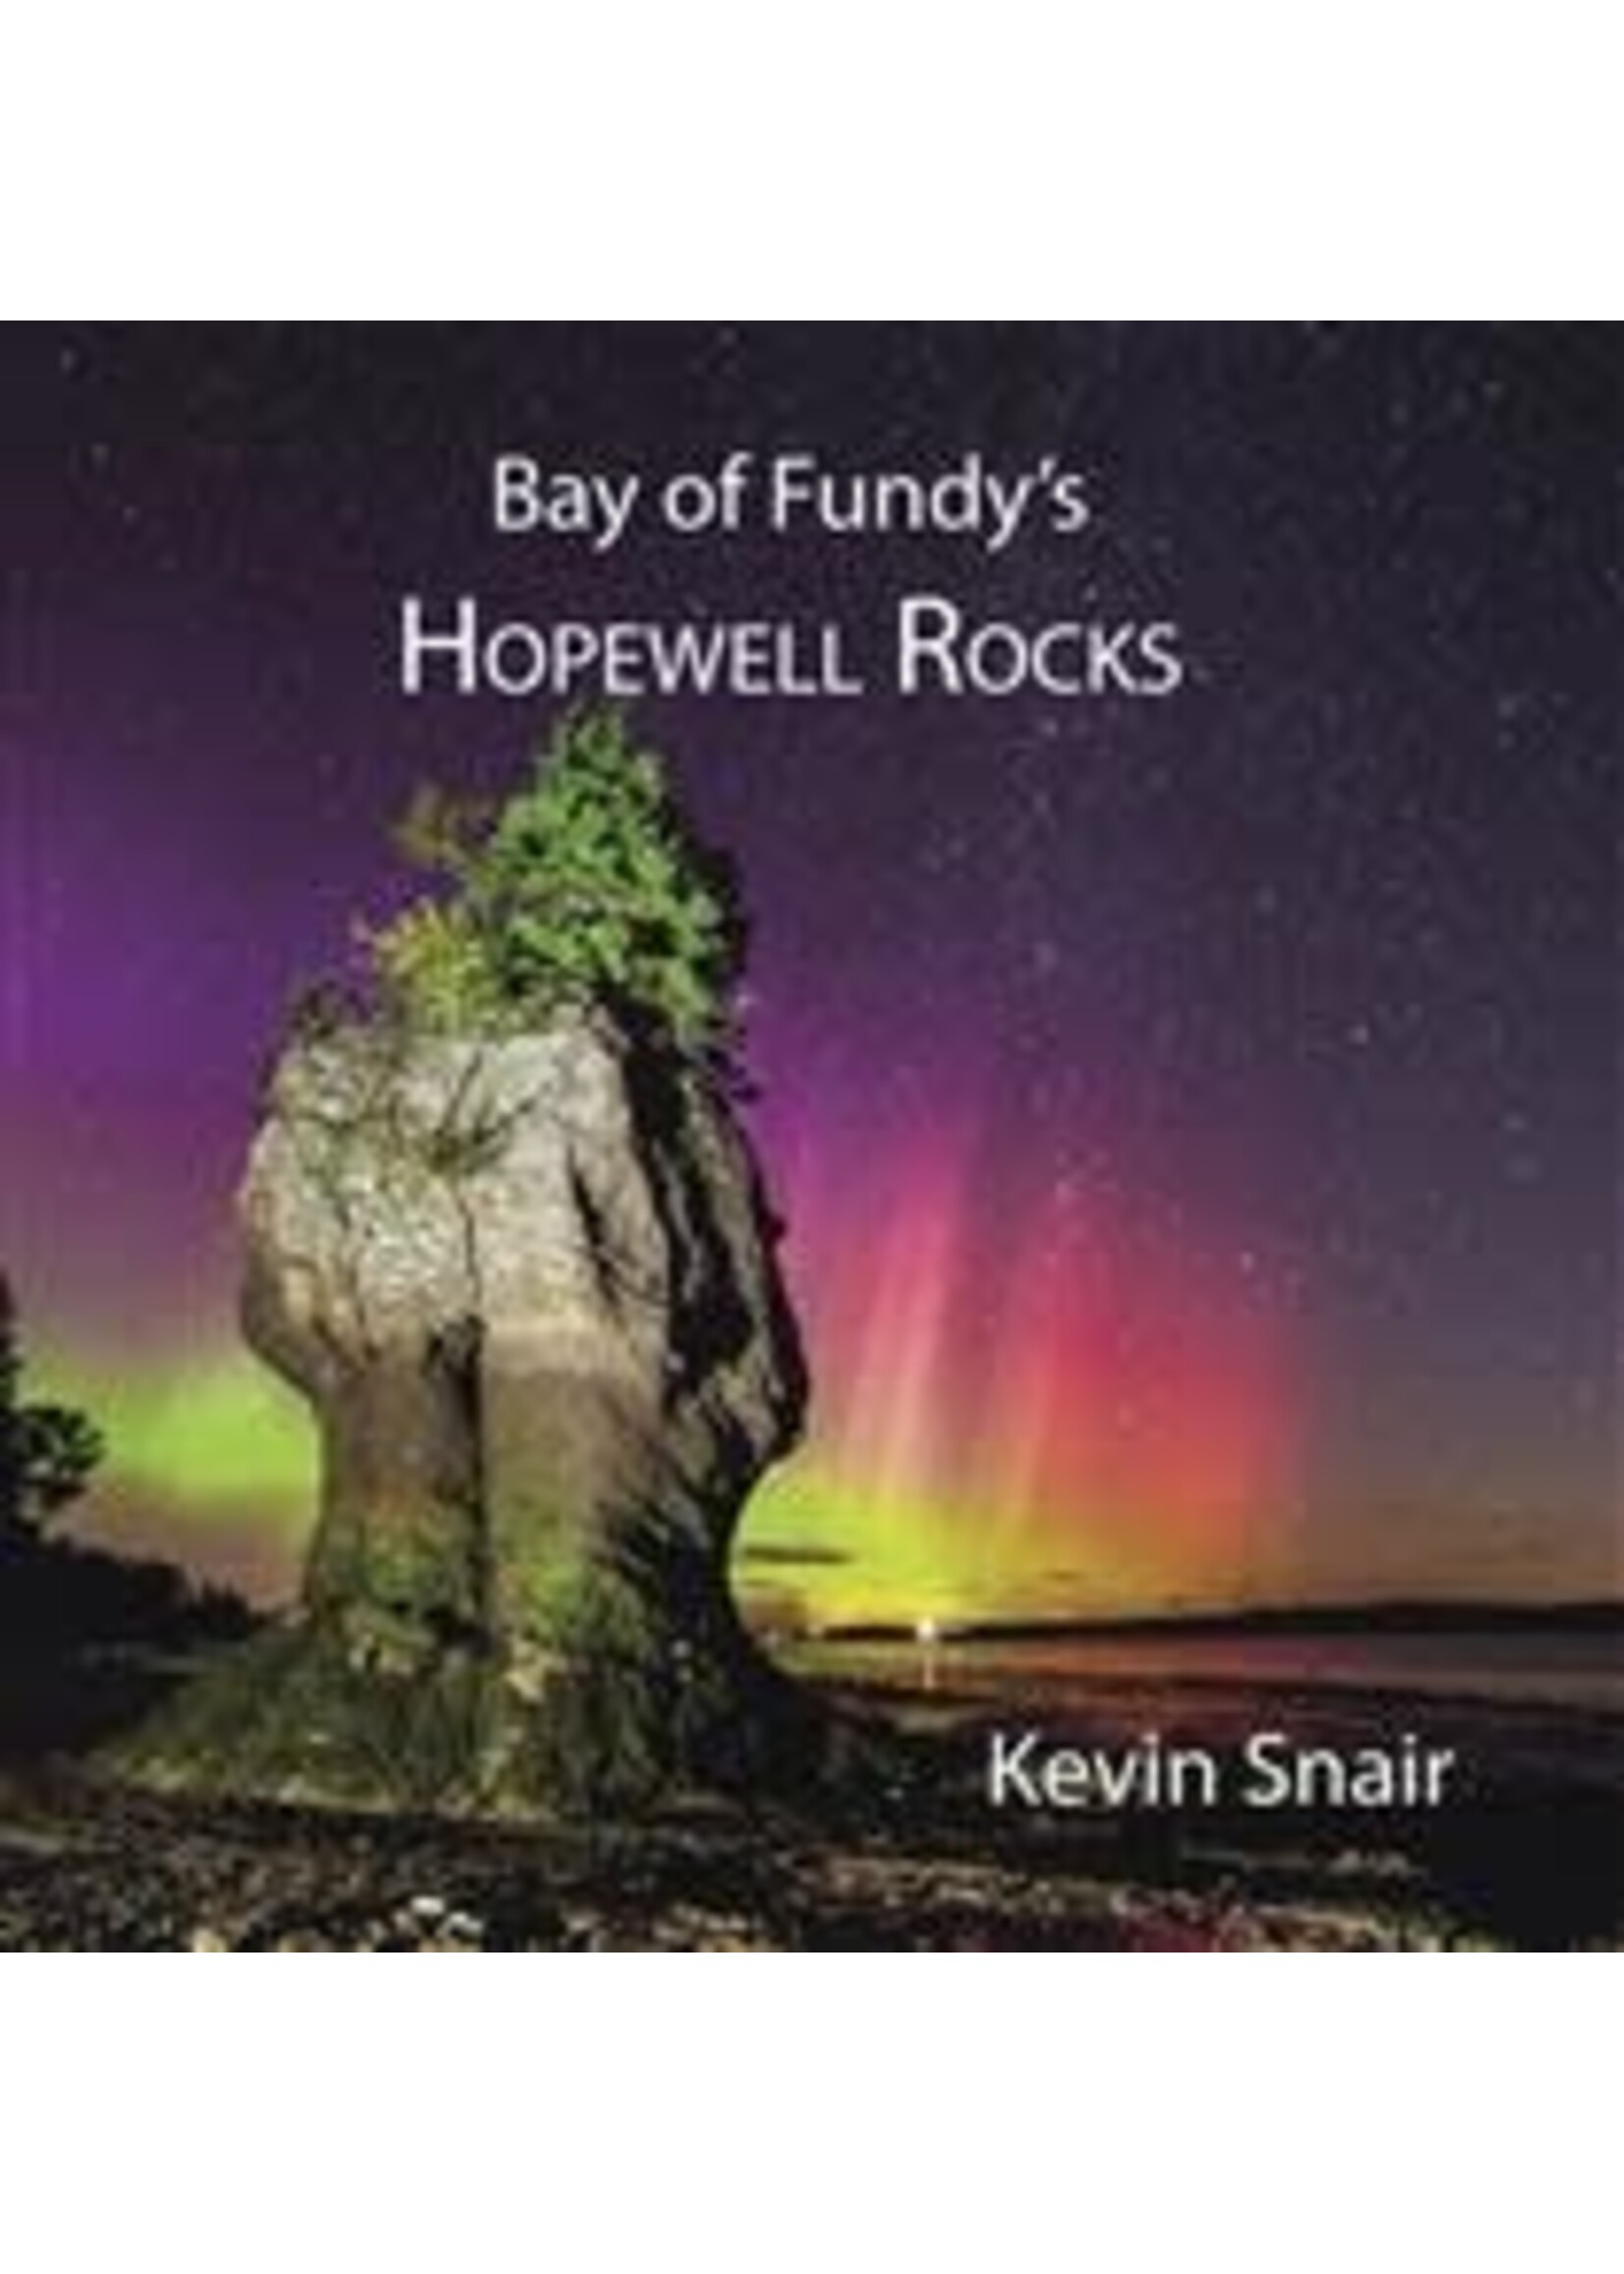 Bay of Fundy's Hopewell Rocks (New edition) by Kevin Snair